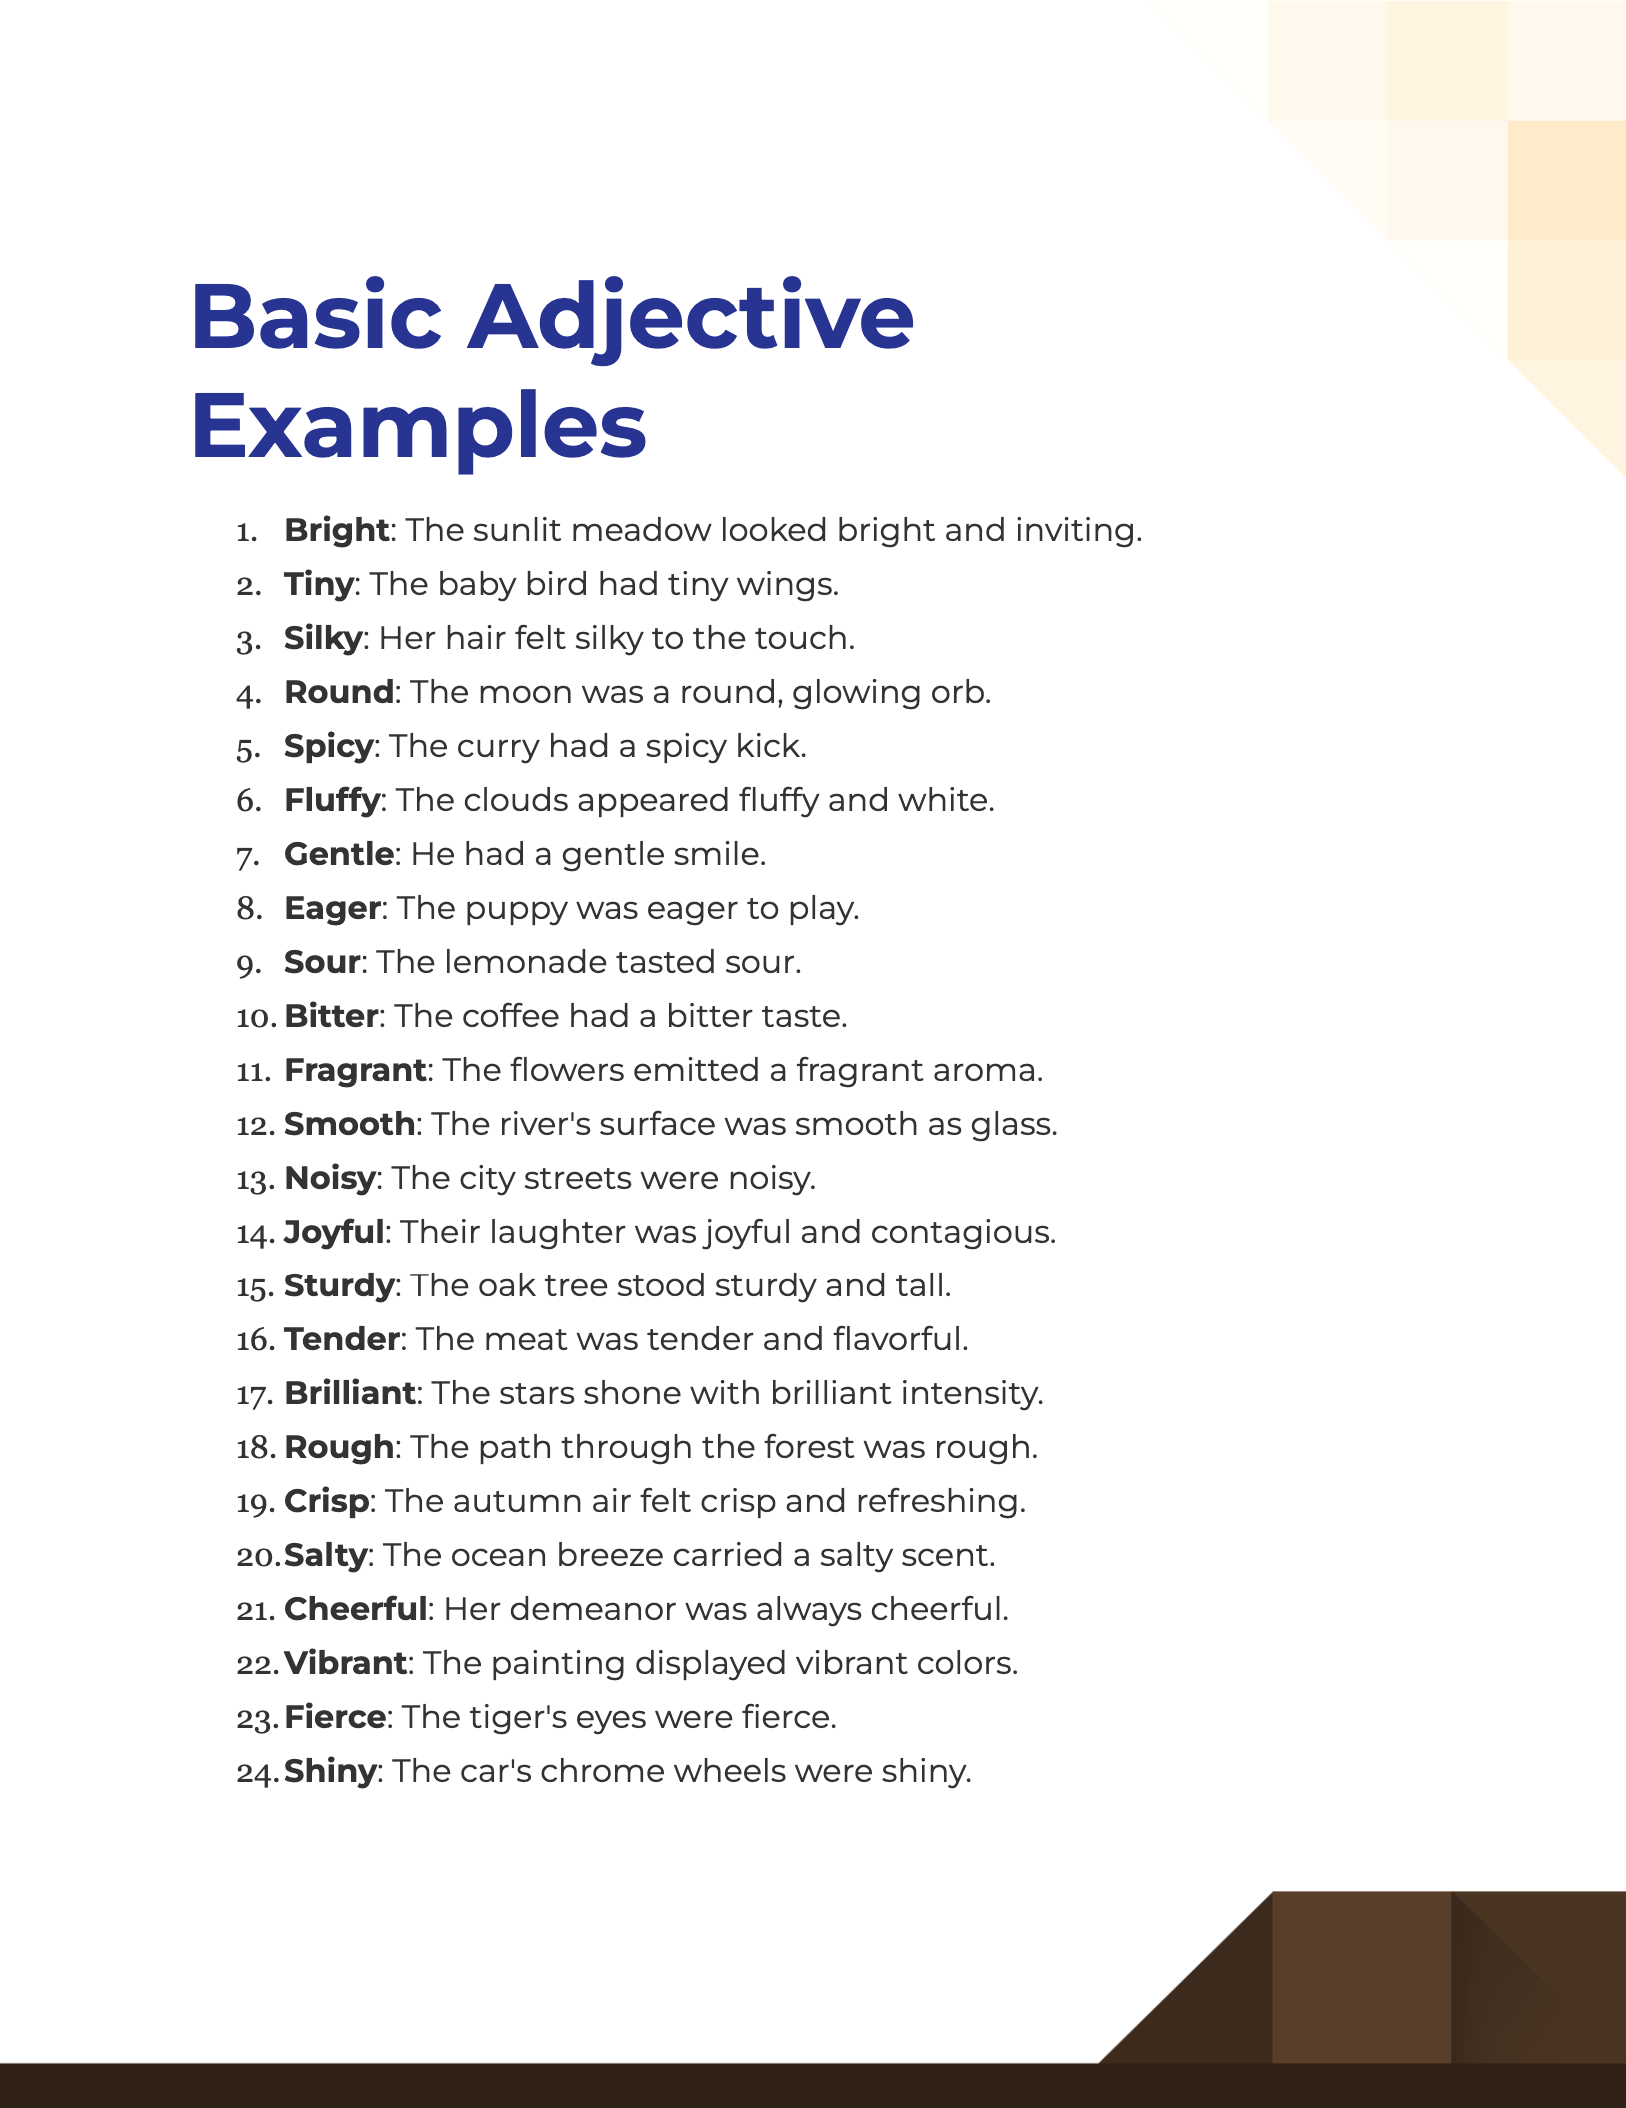 basic adjective examples1